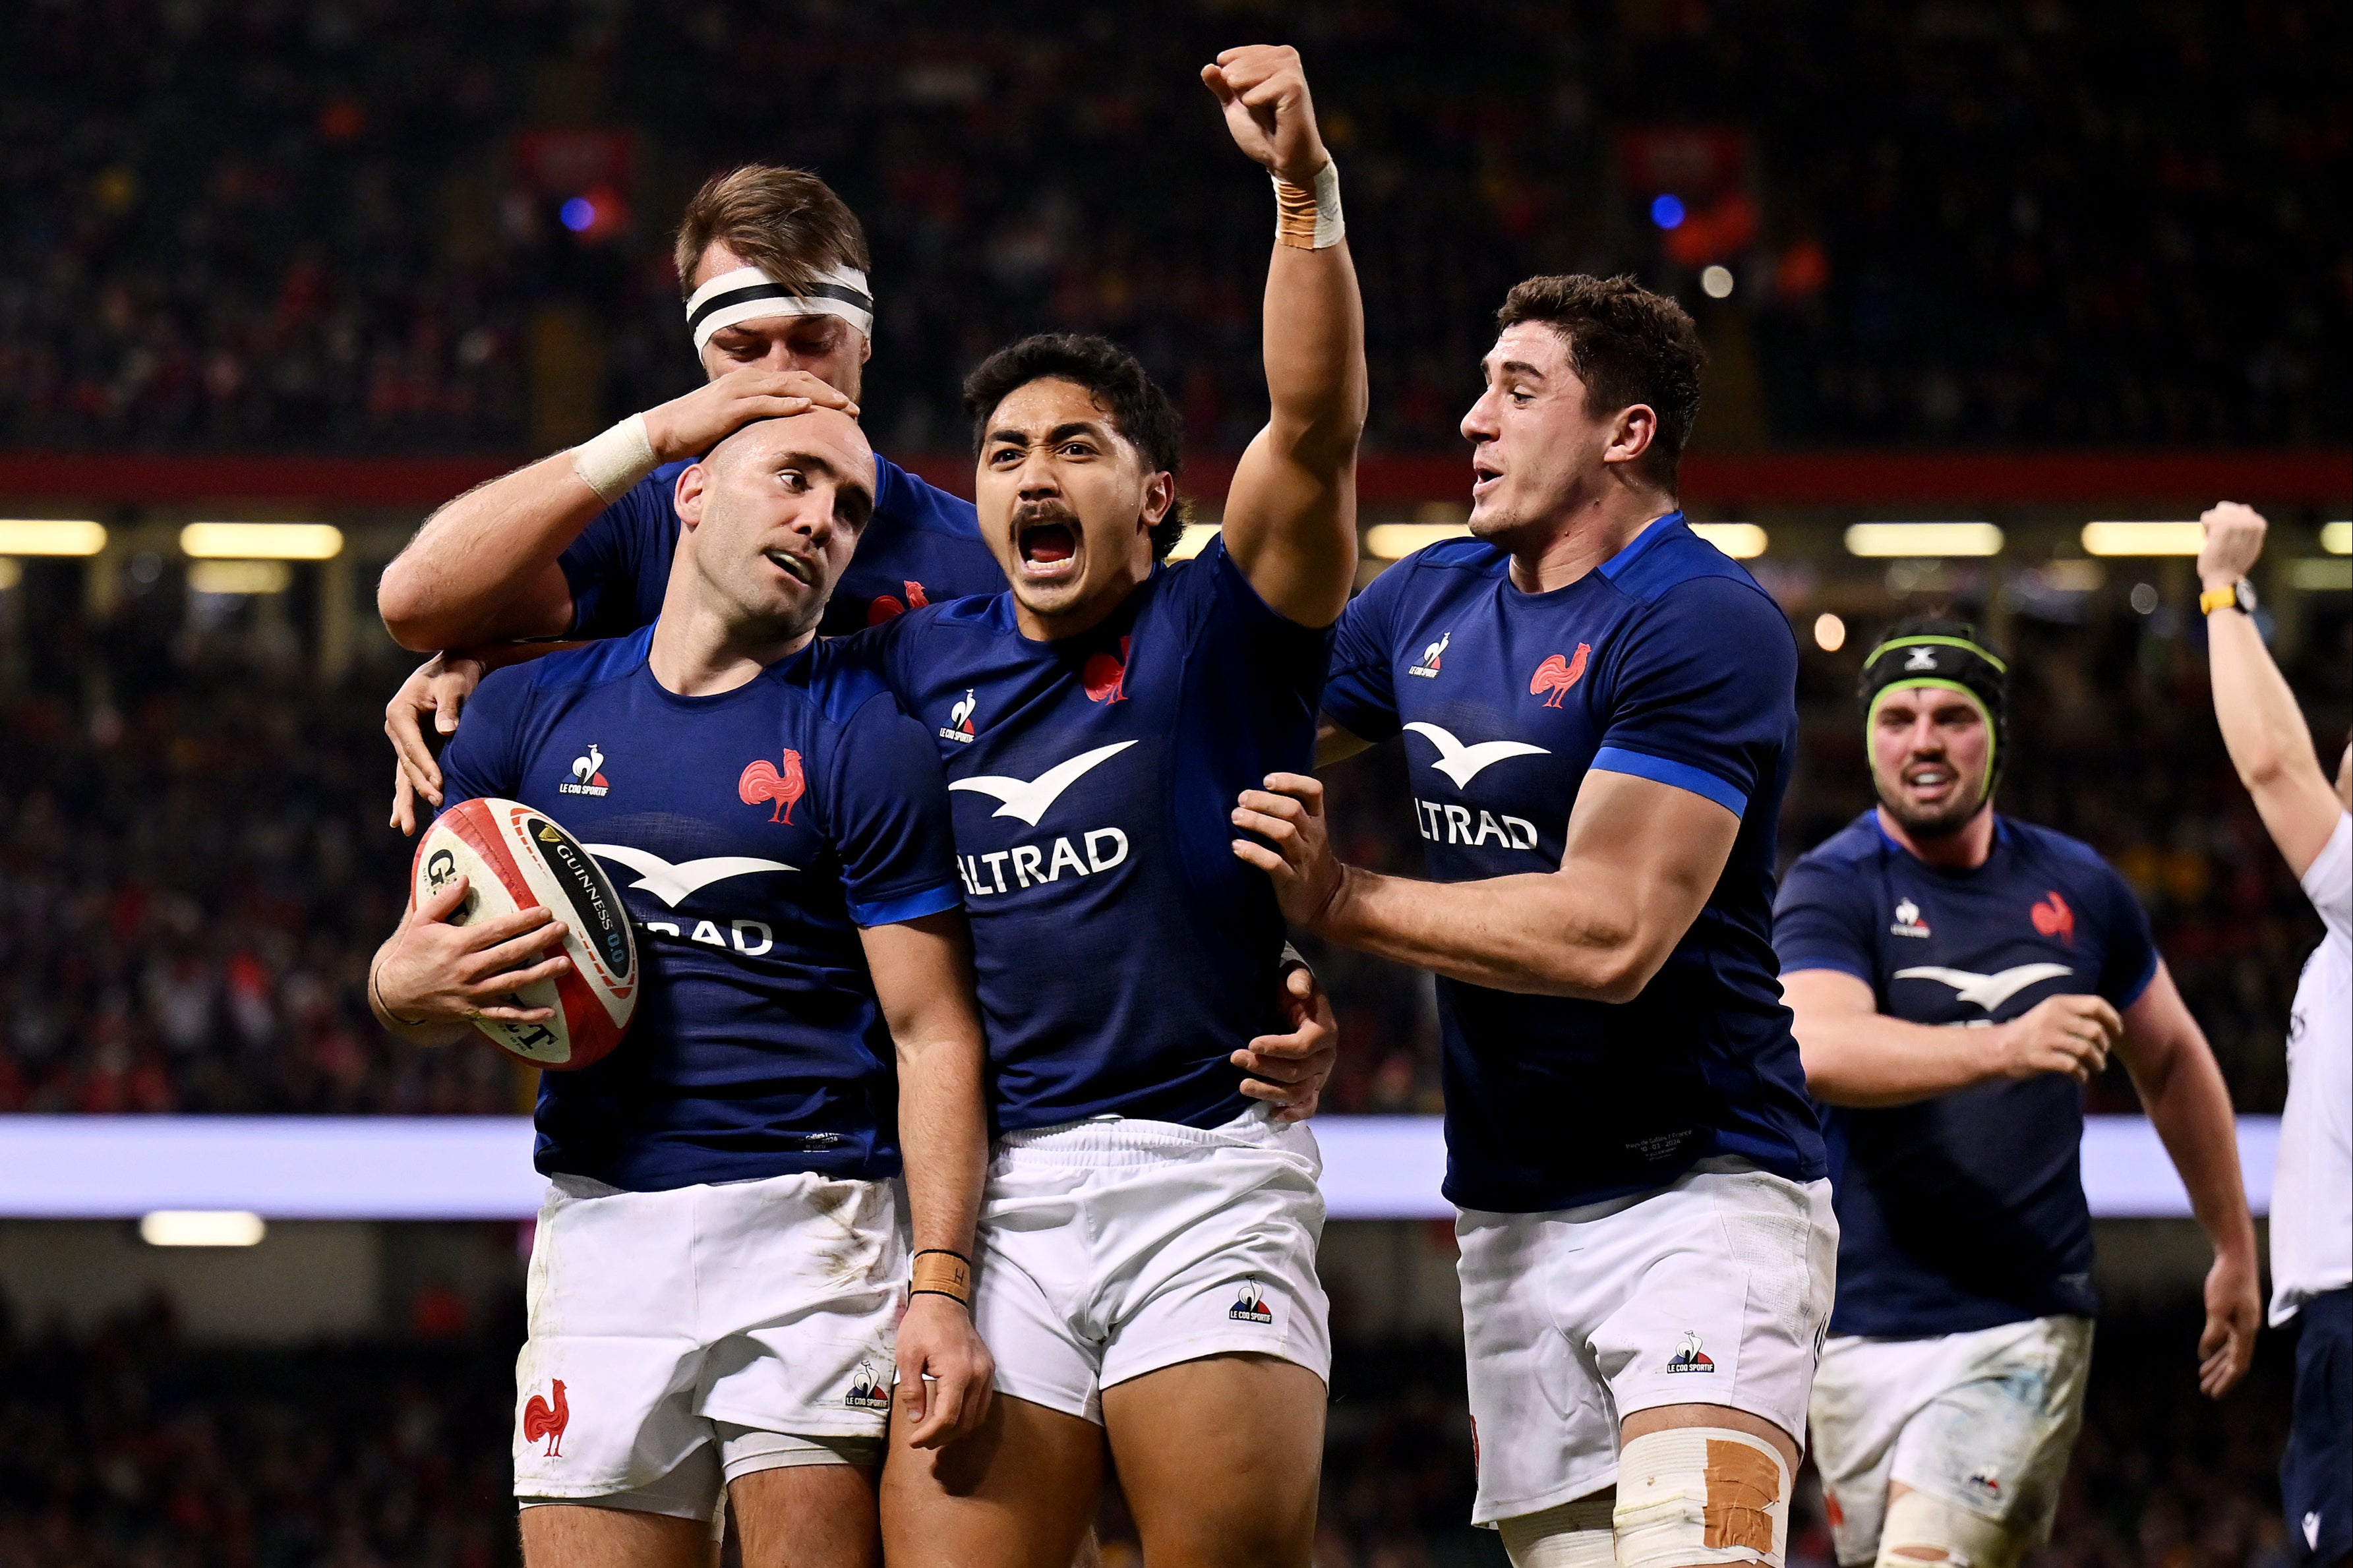 France secured victory thanks to a final-quarter surge in Cardiff